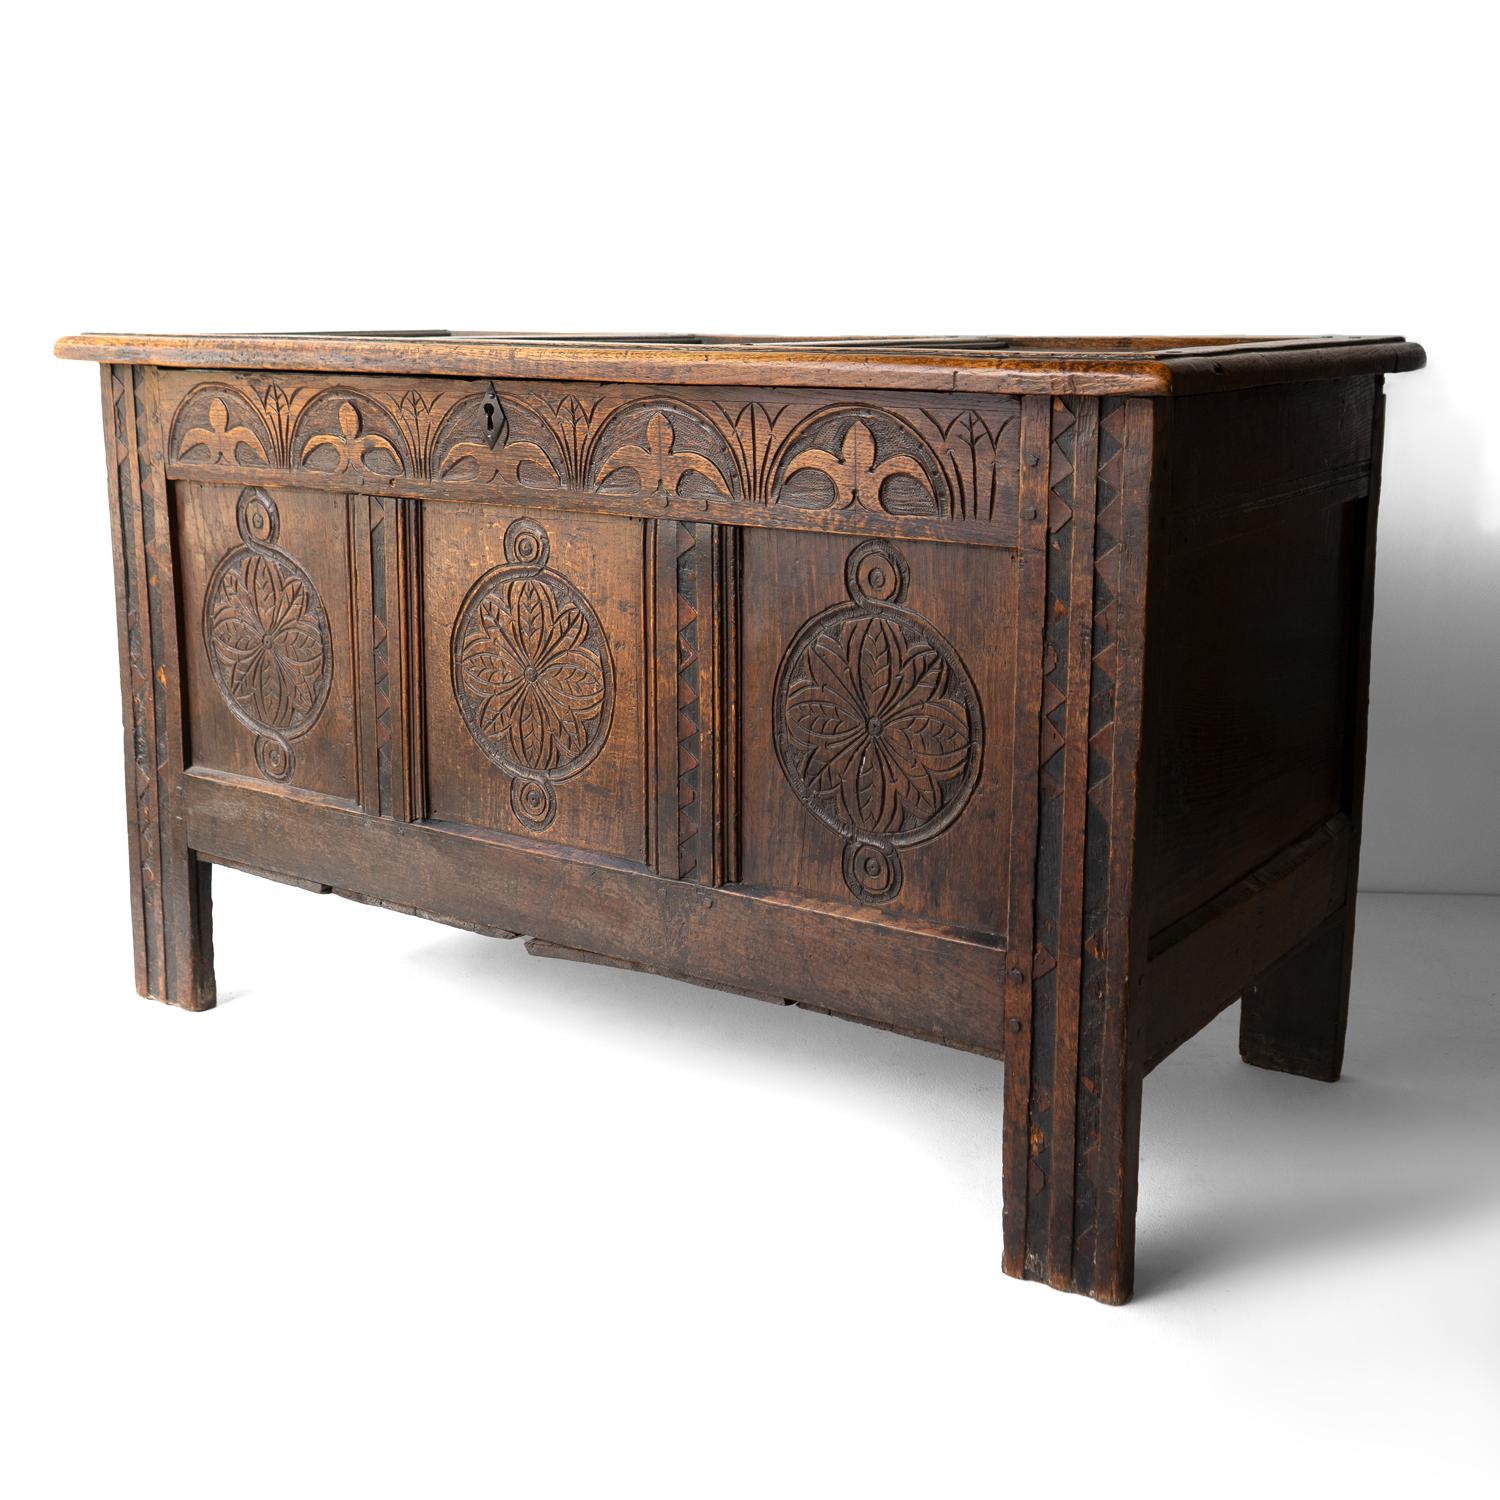 Hand-Carved Antique Charles II West Country Carved Oak Coffer 17th Century Blanket Box Chest For Sale